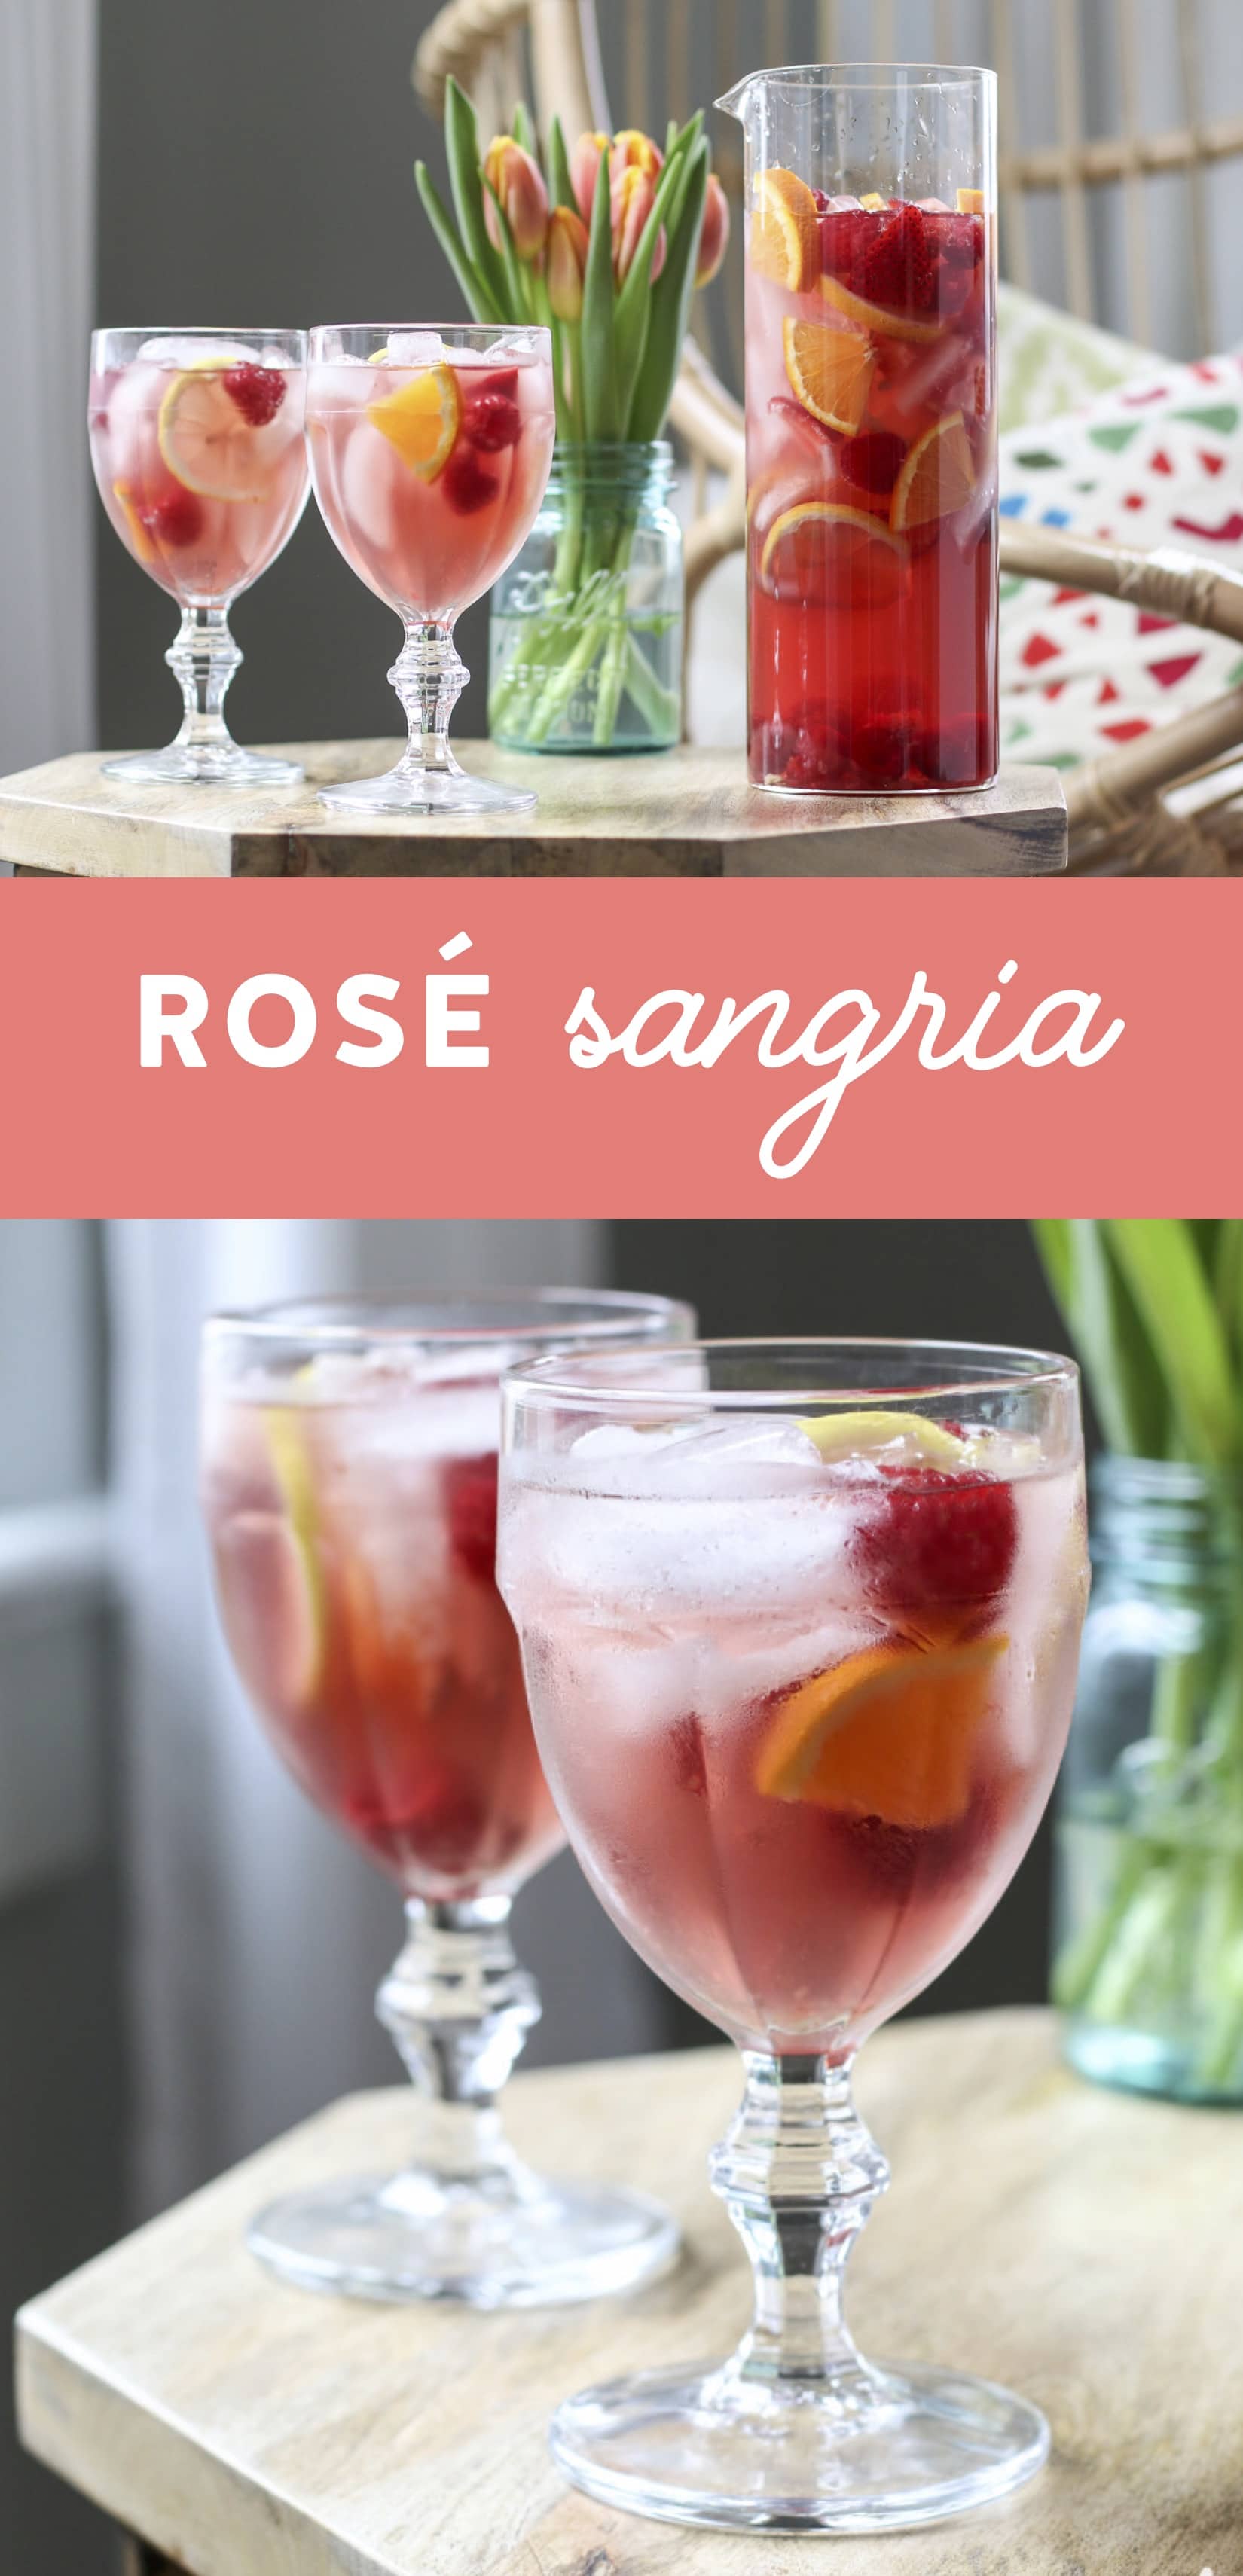 This Rosé Sangria is the perfect blend of citrus, fresh berries, and rosé. A perfect #cocktail recipe for #spring and summer entertaining. #sangria #rose